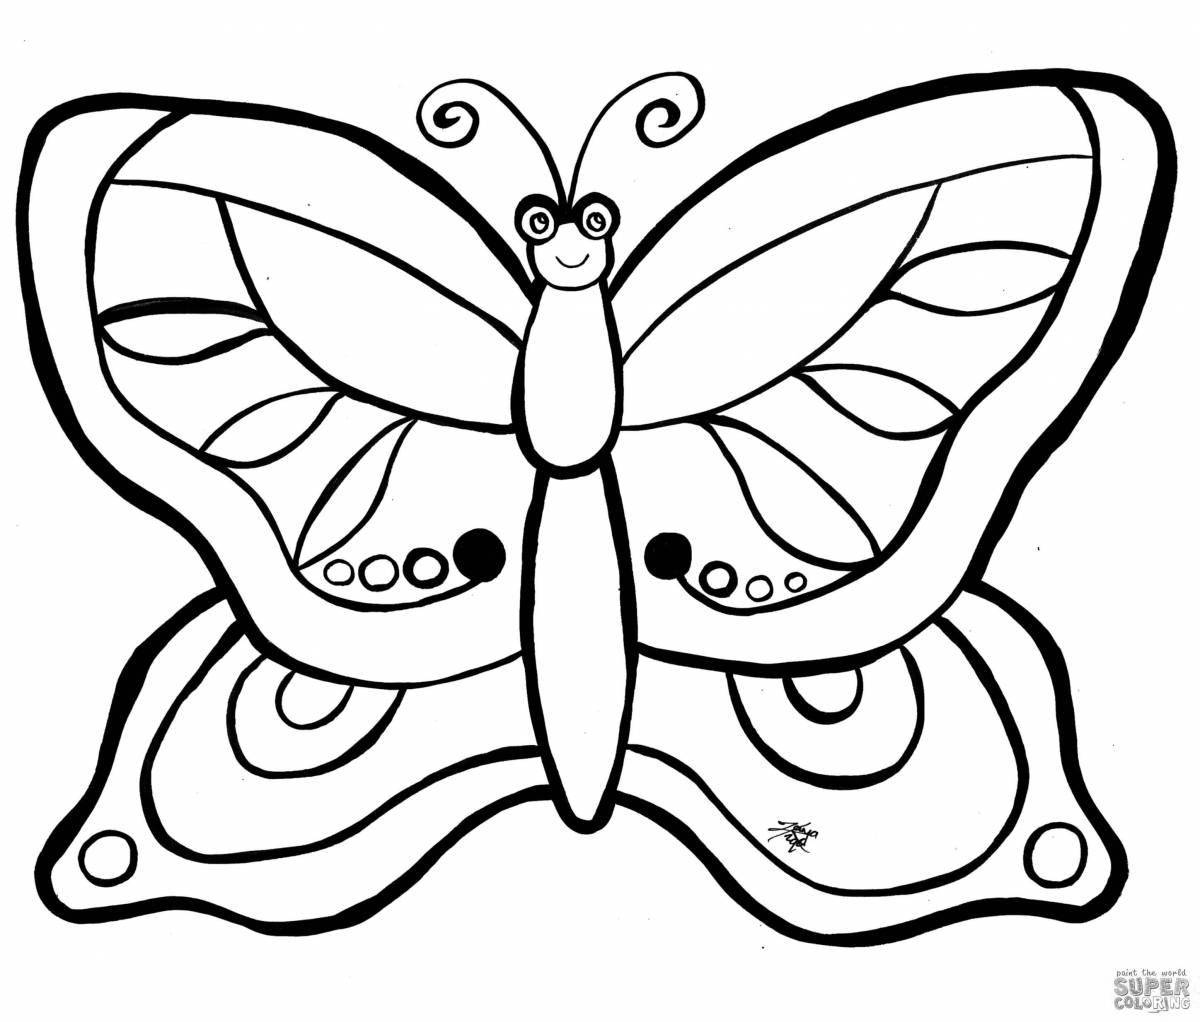 Great butterfly coloring book for kids 2-3 years old